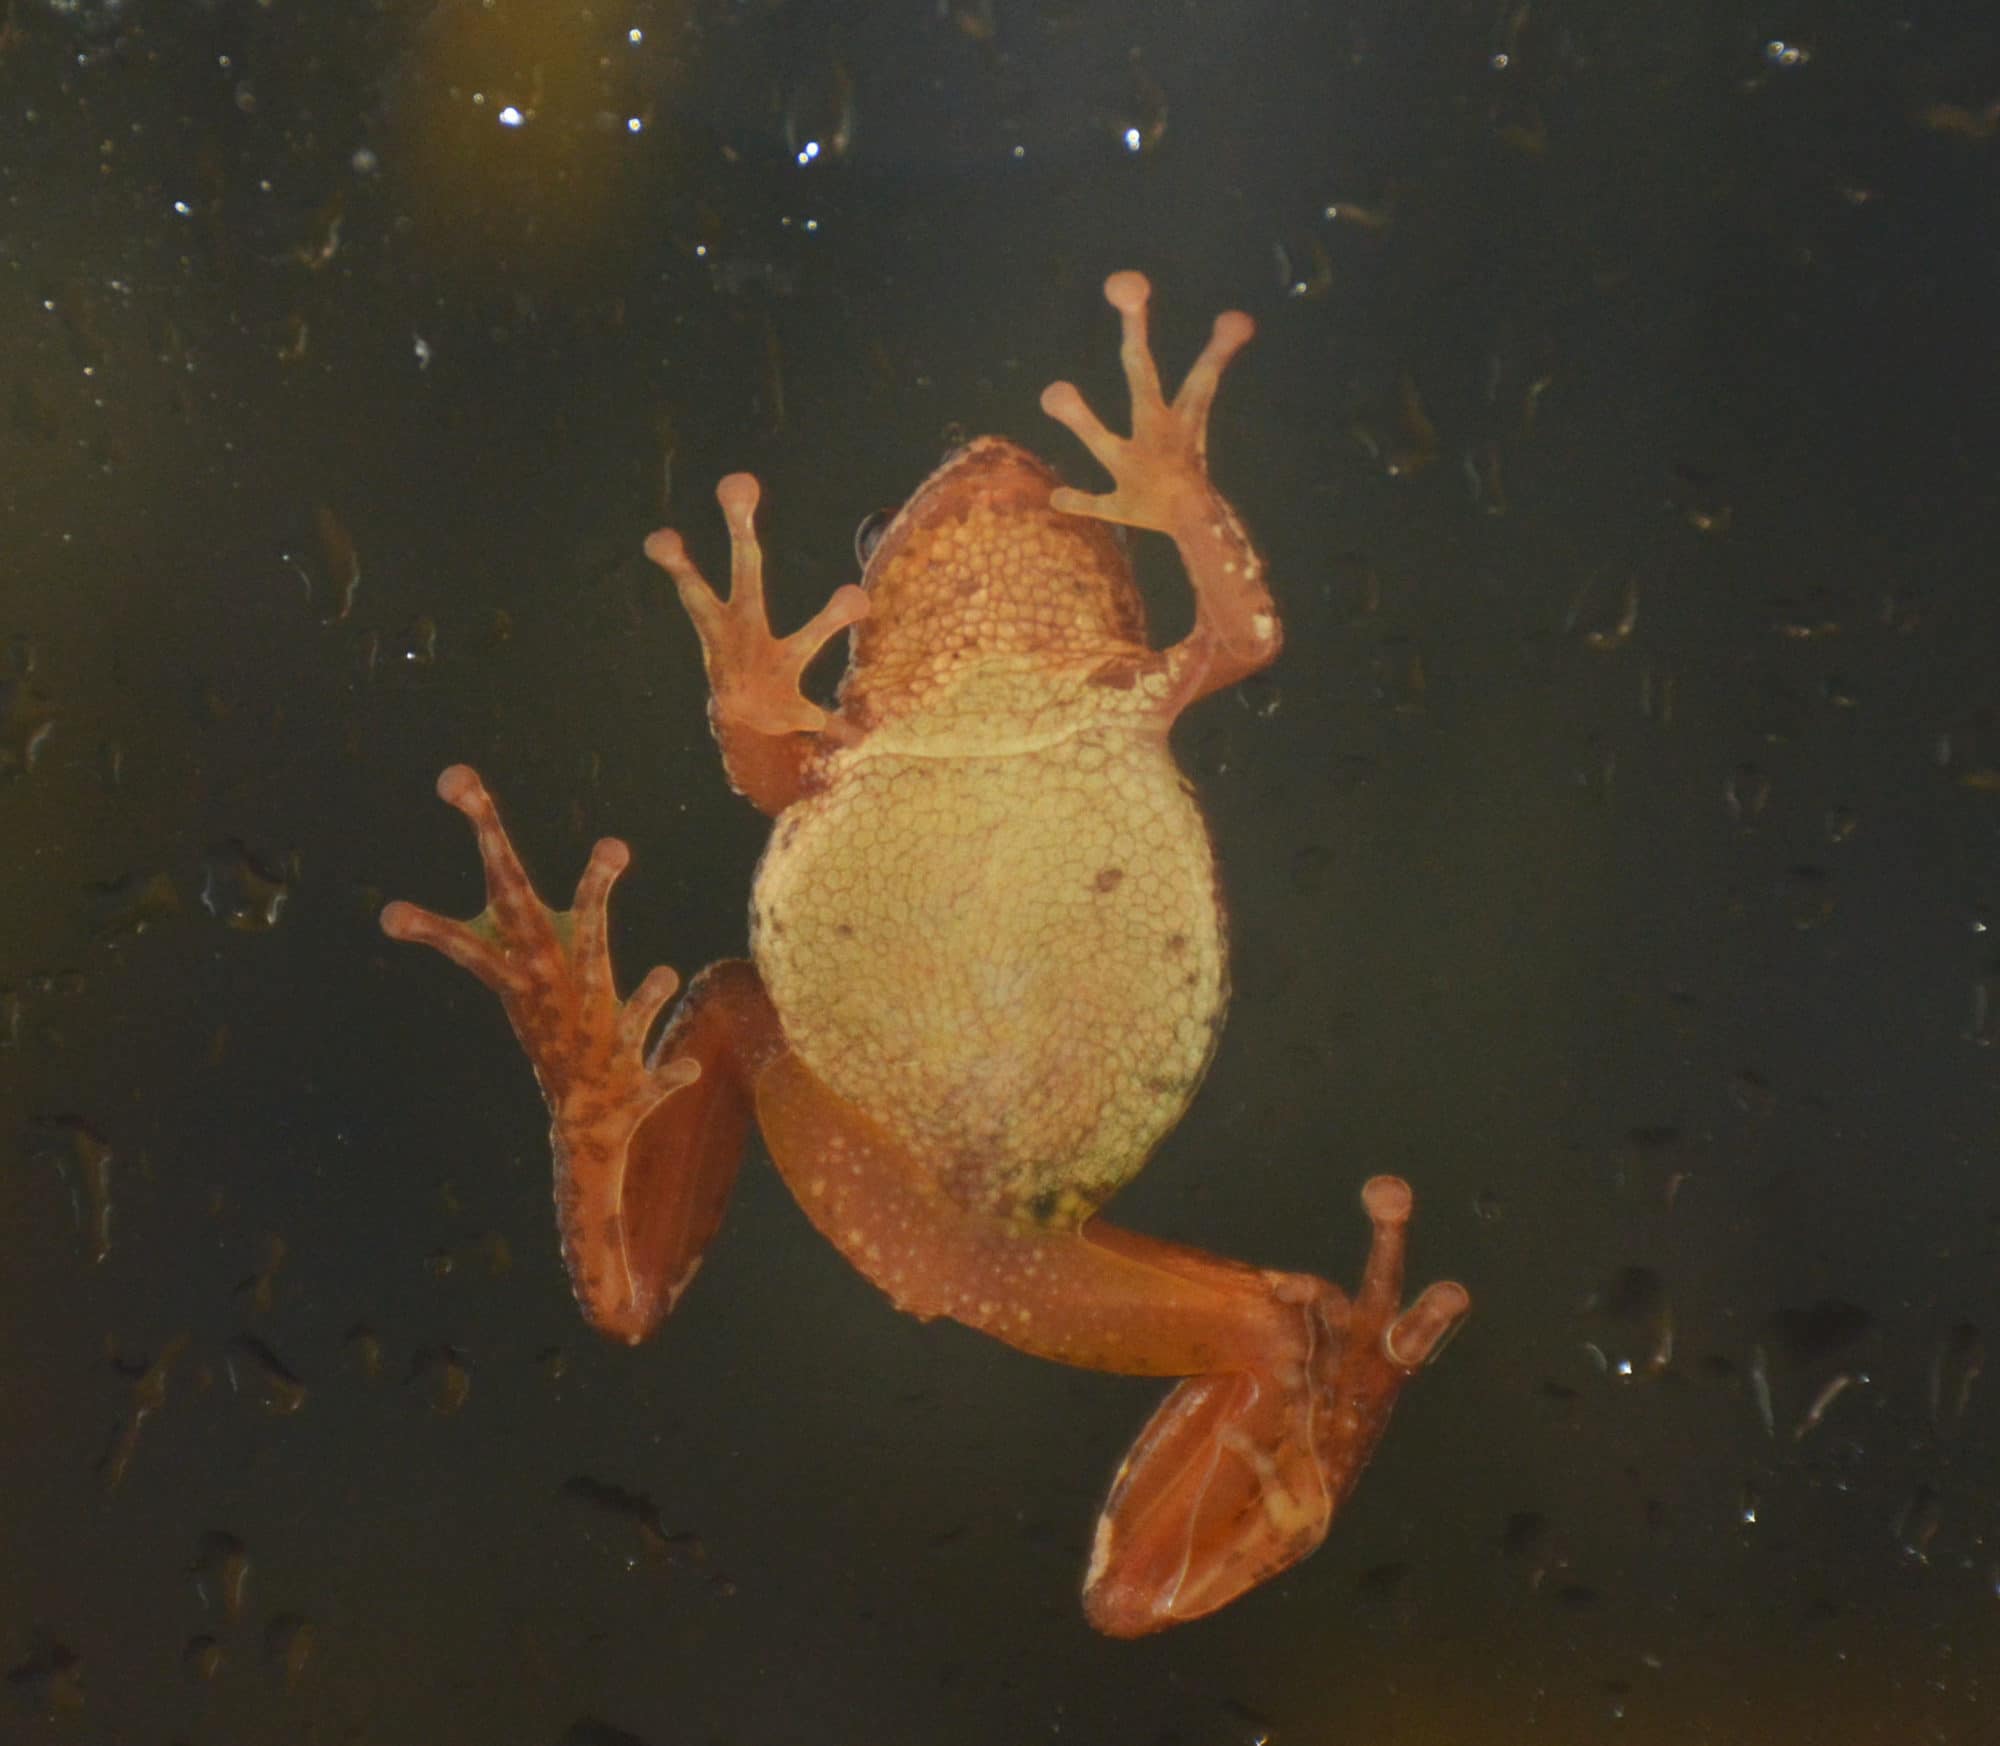 The underside of a spring peeper, as photographed through a glass window. (photo © Donna Roscoe)